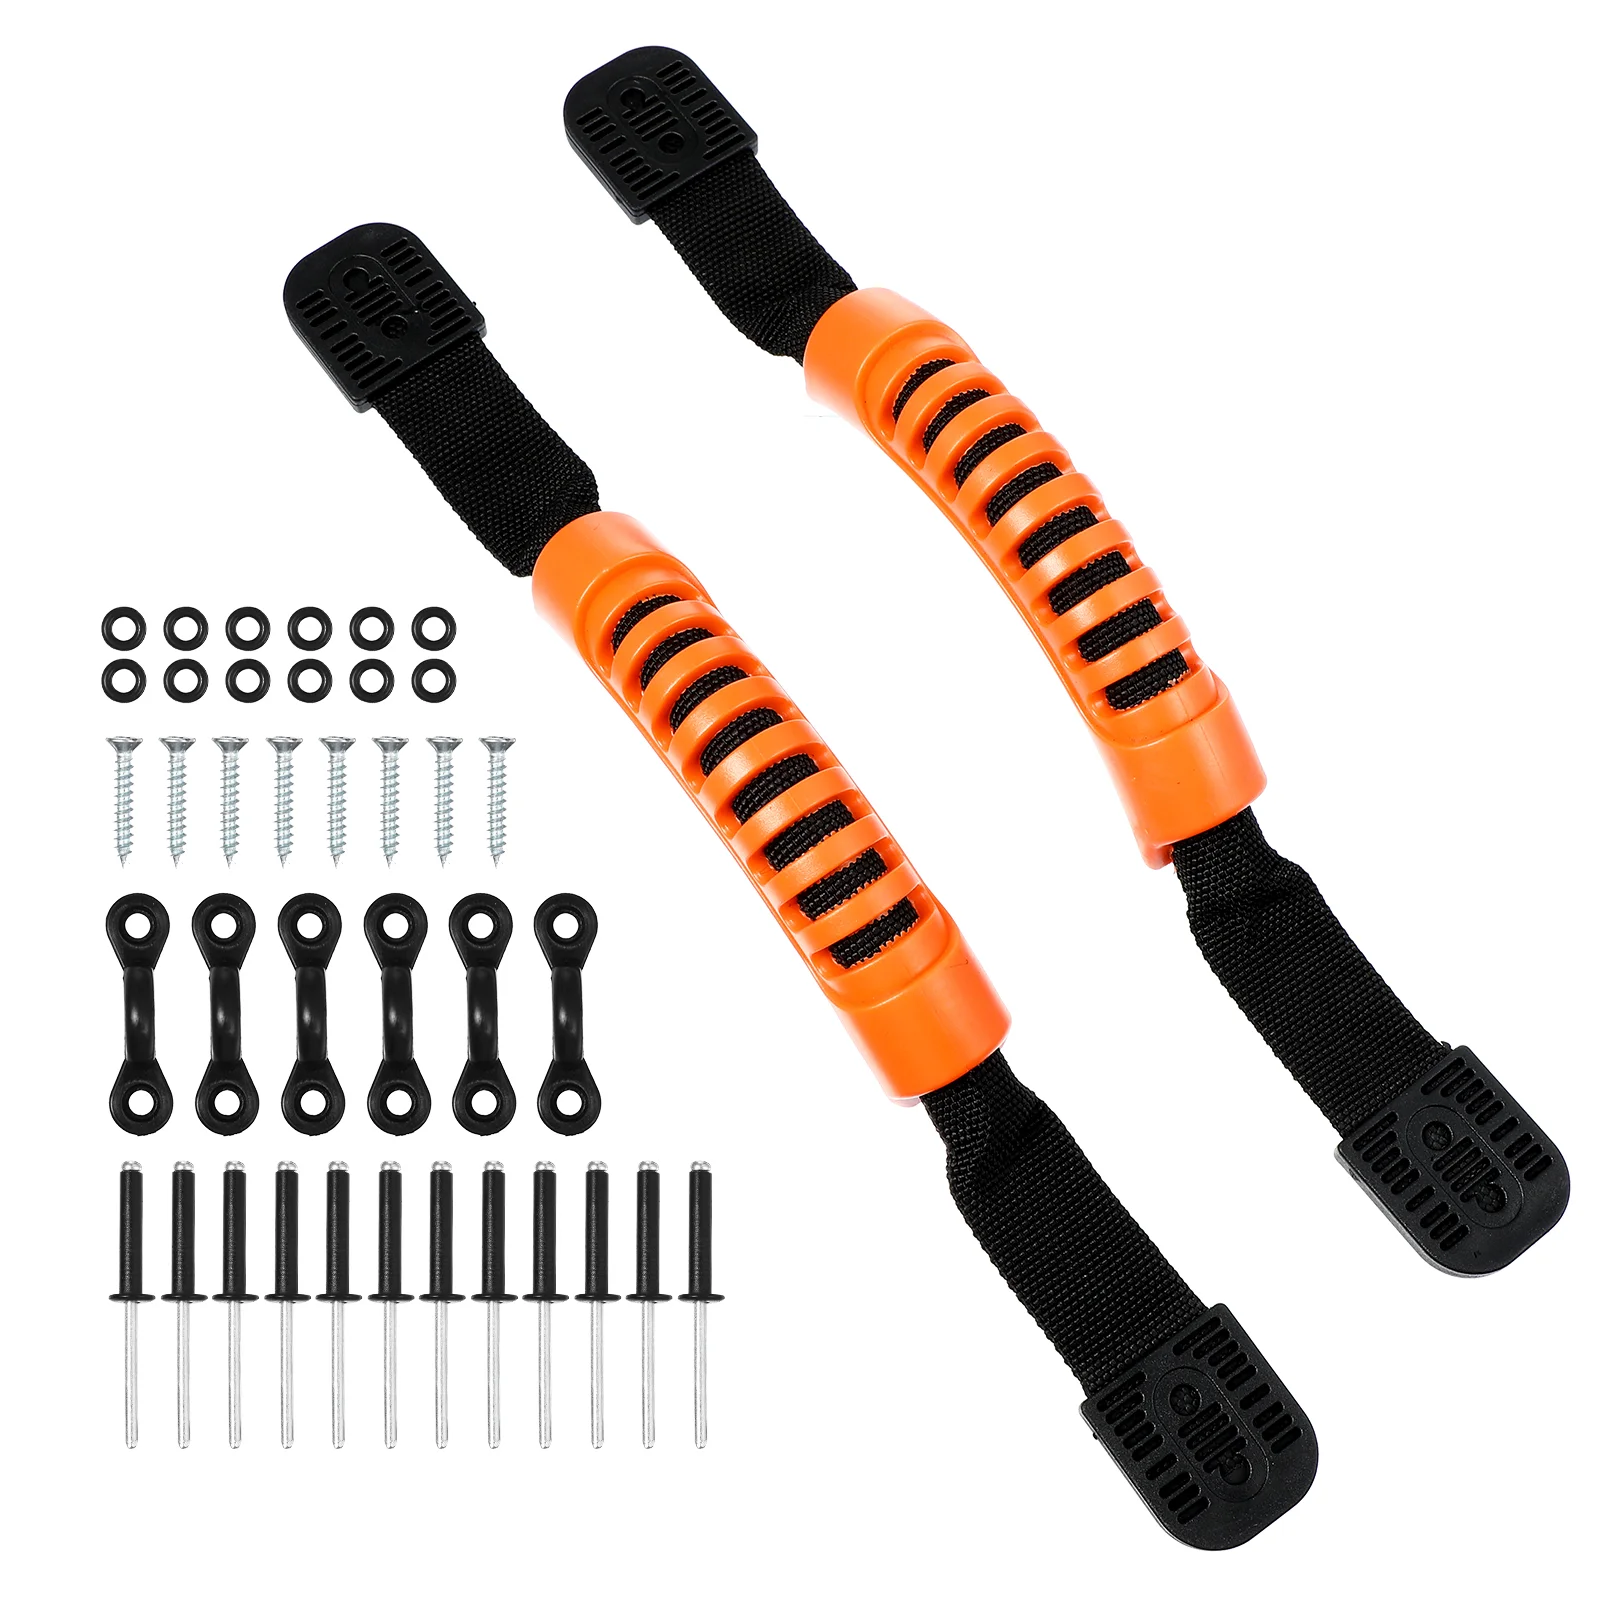 Kayak Handles Anti-Skid Side Mount Kayak Carry Handles Replacement With Rivets And Screws Kayak Paddle Accessories 2pcs set kayak canoe paddle holder clips kayak paddle keeper with screws for buckle holder watercraft accessories 152 31 5 30mm